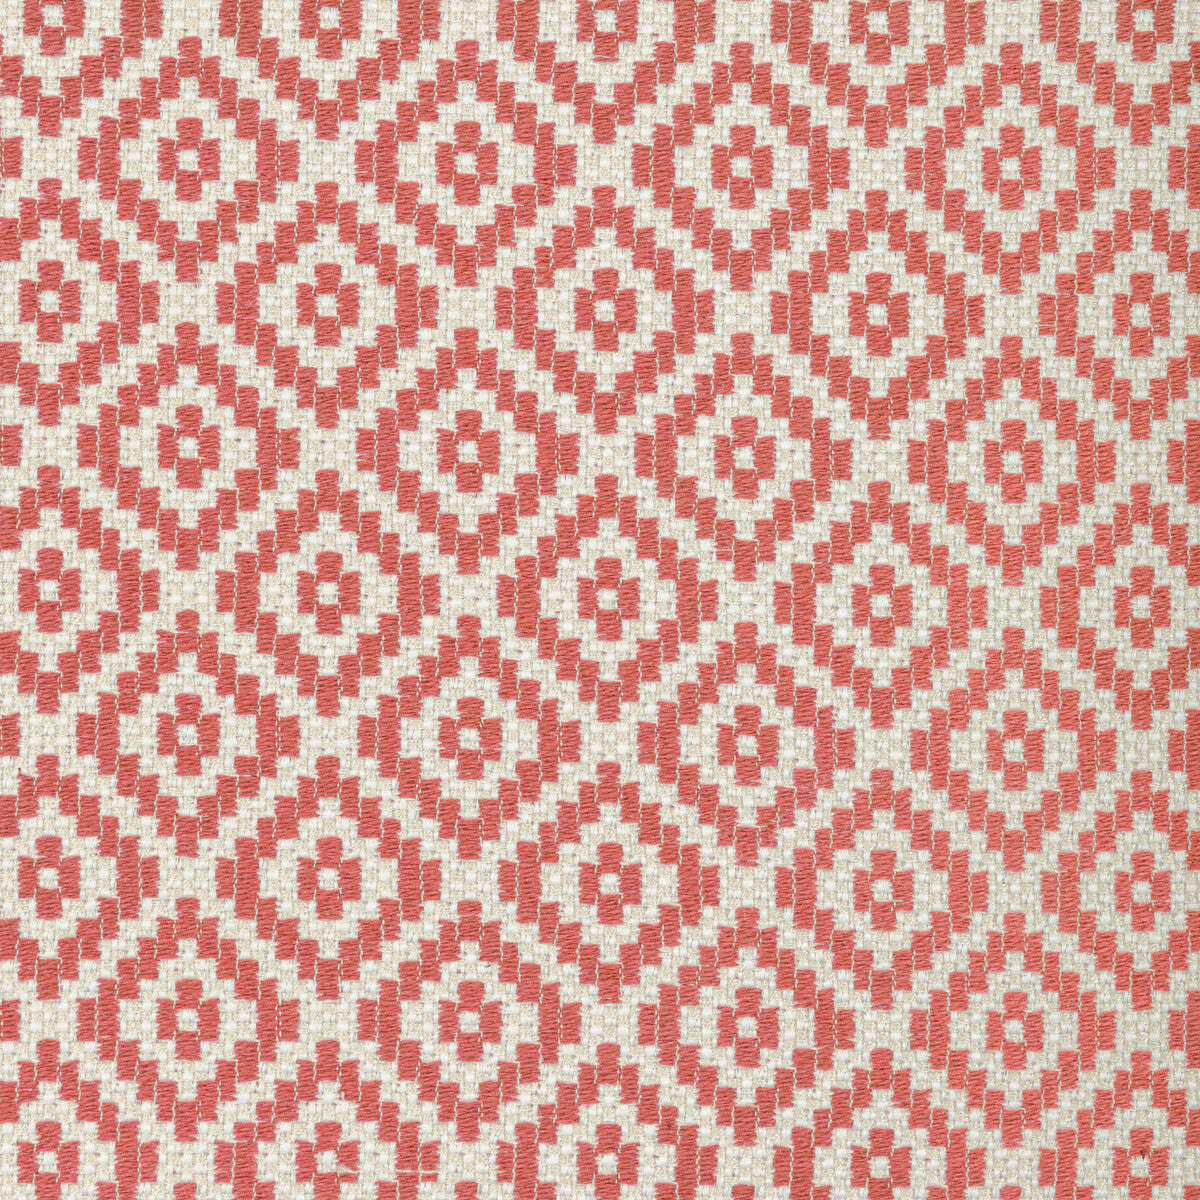 Kravet Design fabric in 36411-7 color - pattern 36411.7.0 - by Kravet Design in the Performance Crypton Home collection